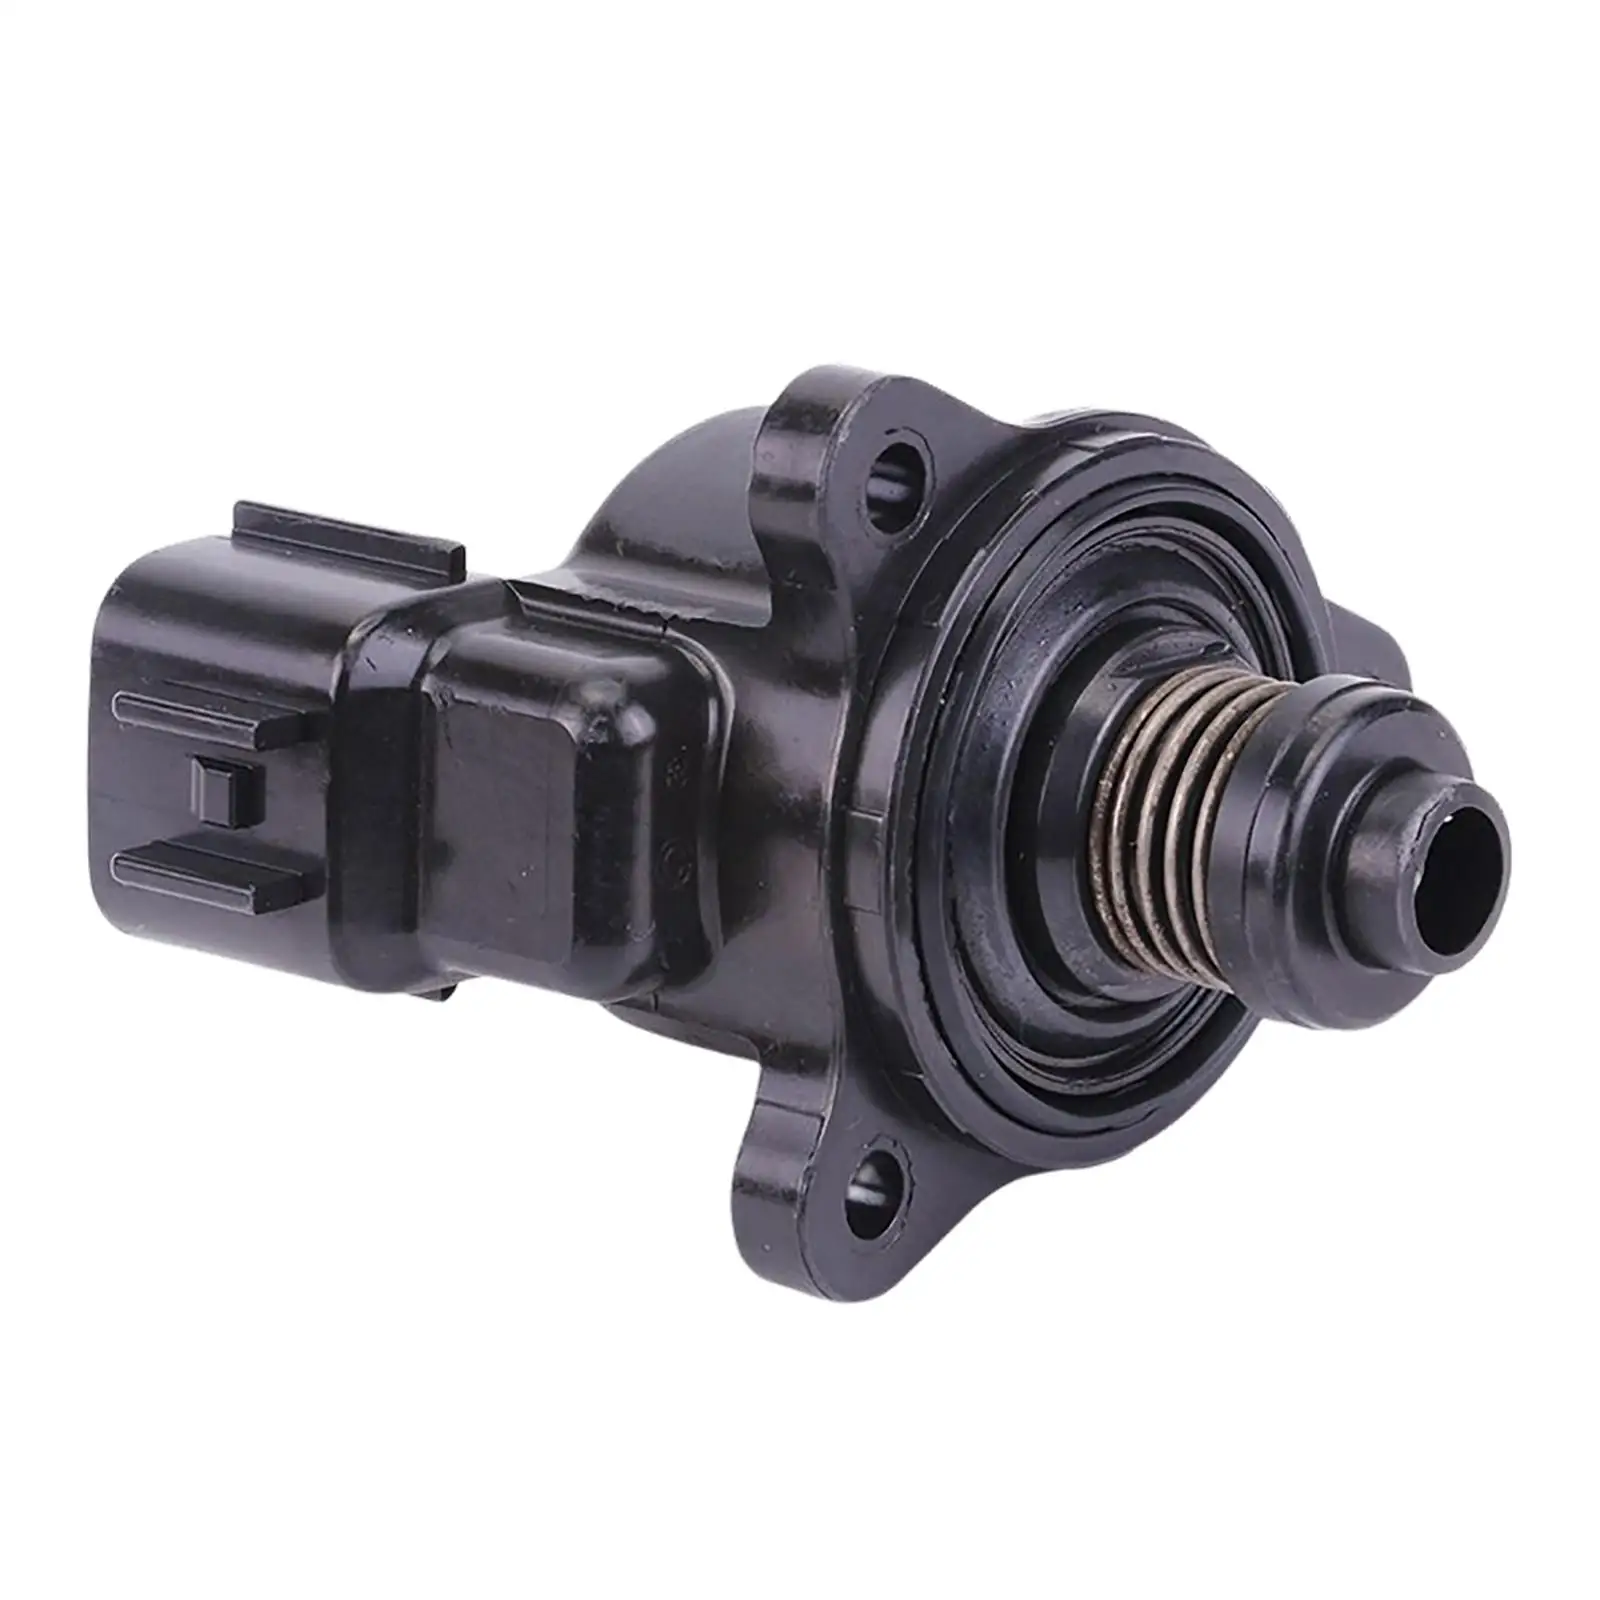 Idle  Valve, 6812A-00-00,  ,6812A00, 6812A-00, Car Accessories Stepper Motor for  Outboard